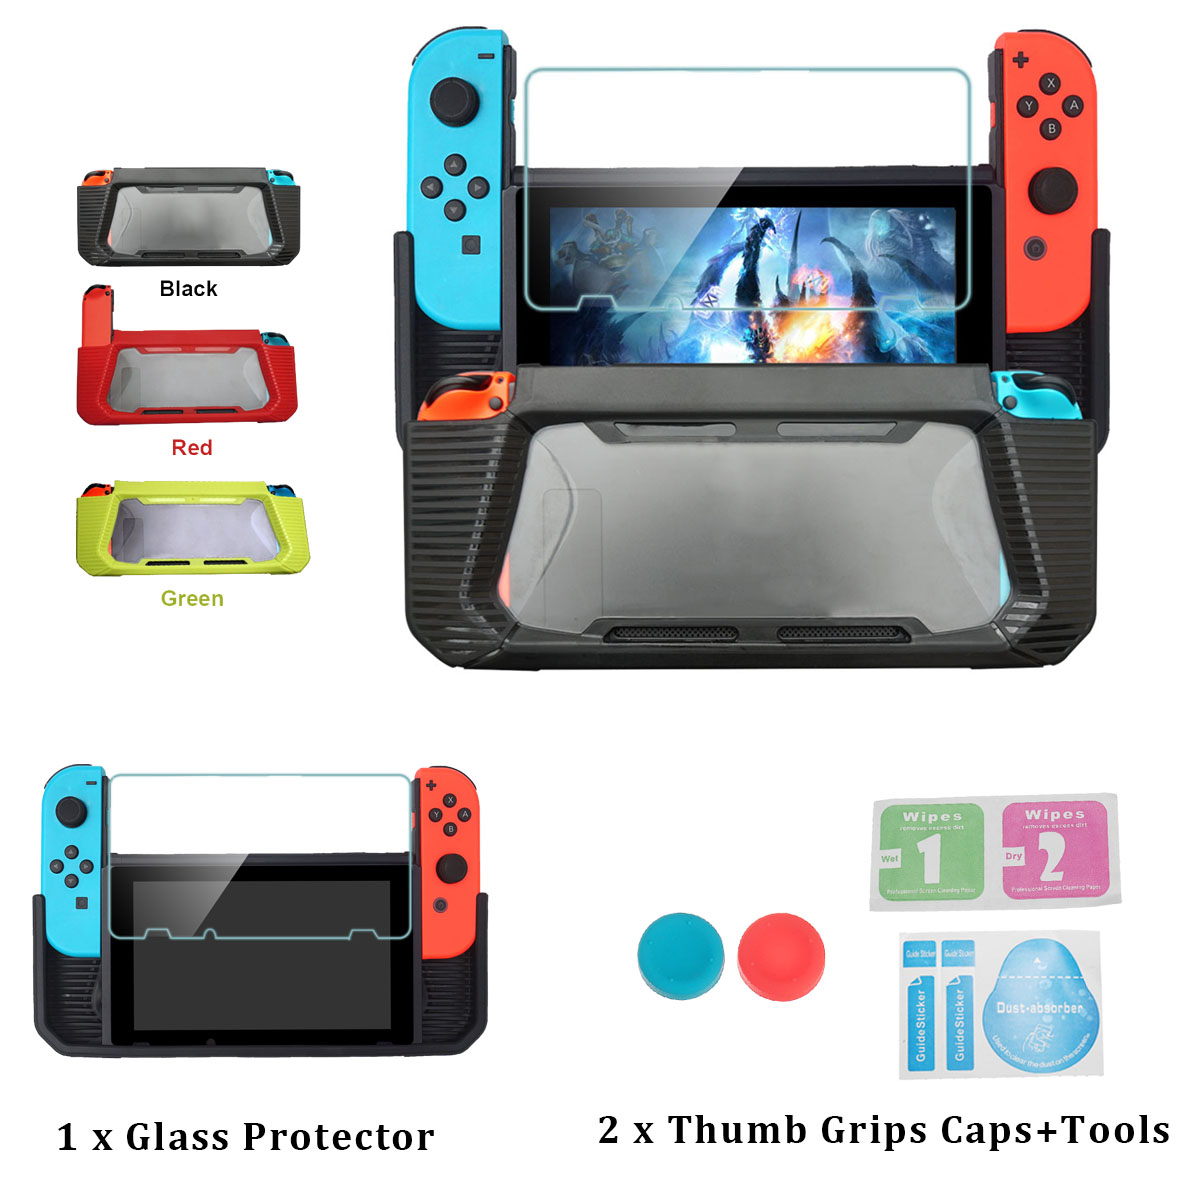 Backboard-Radiator-Hard-Cover-Shell-Hybrid-Protective-Case-For-Nintendo-Switch-Game-Console-1454633-2